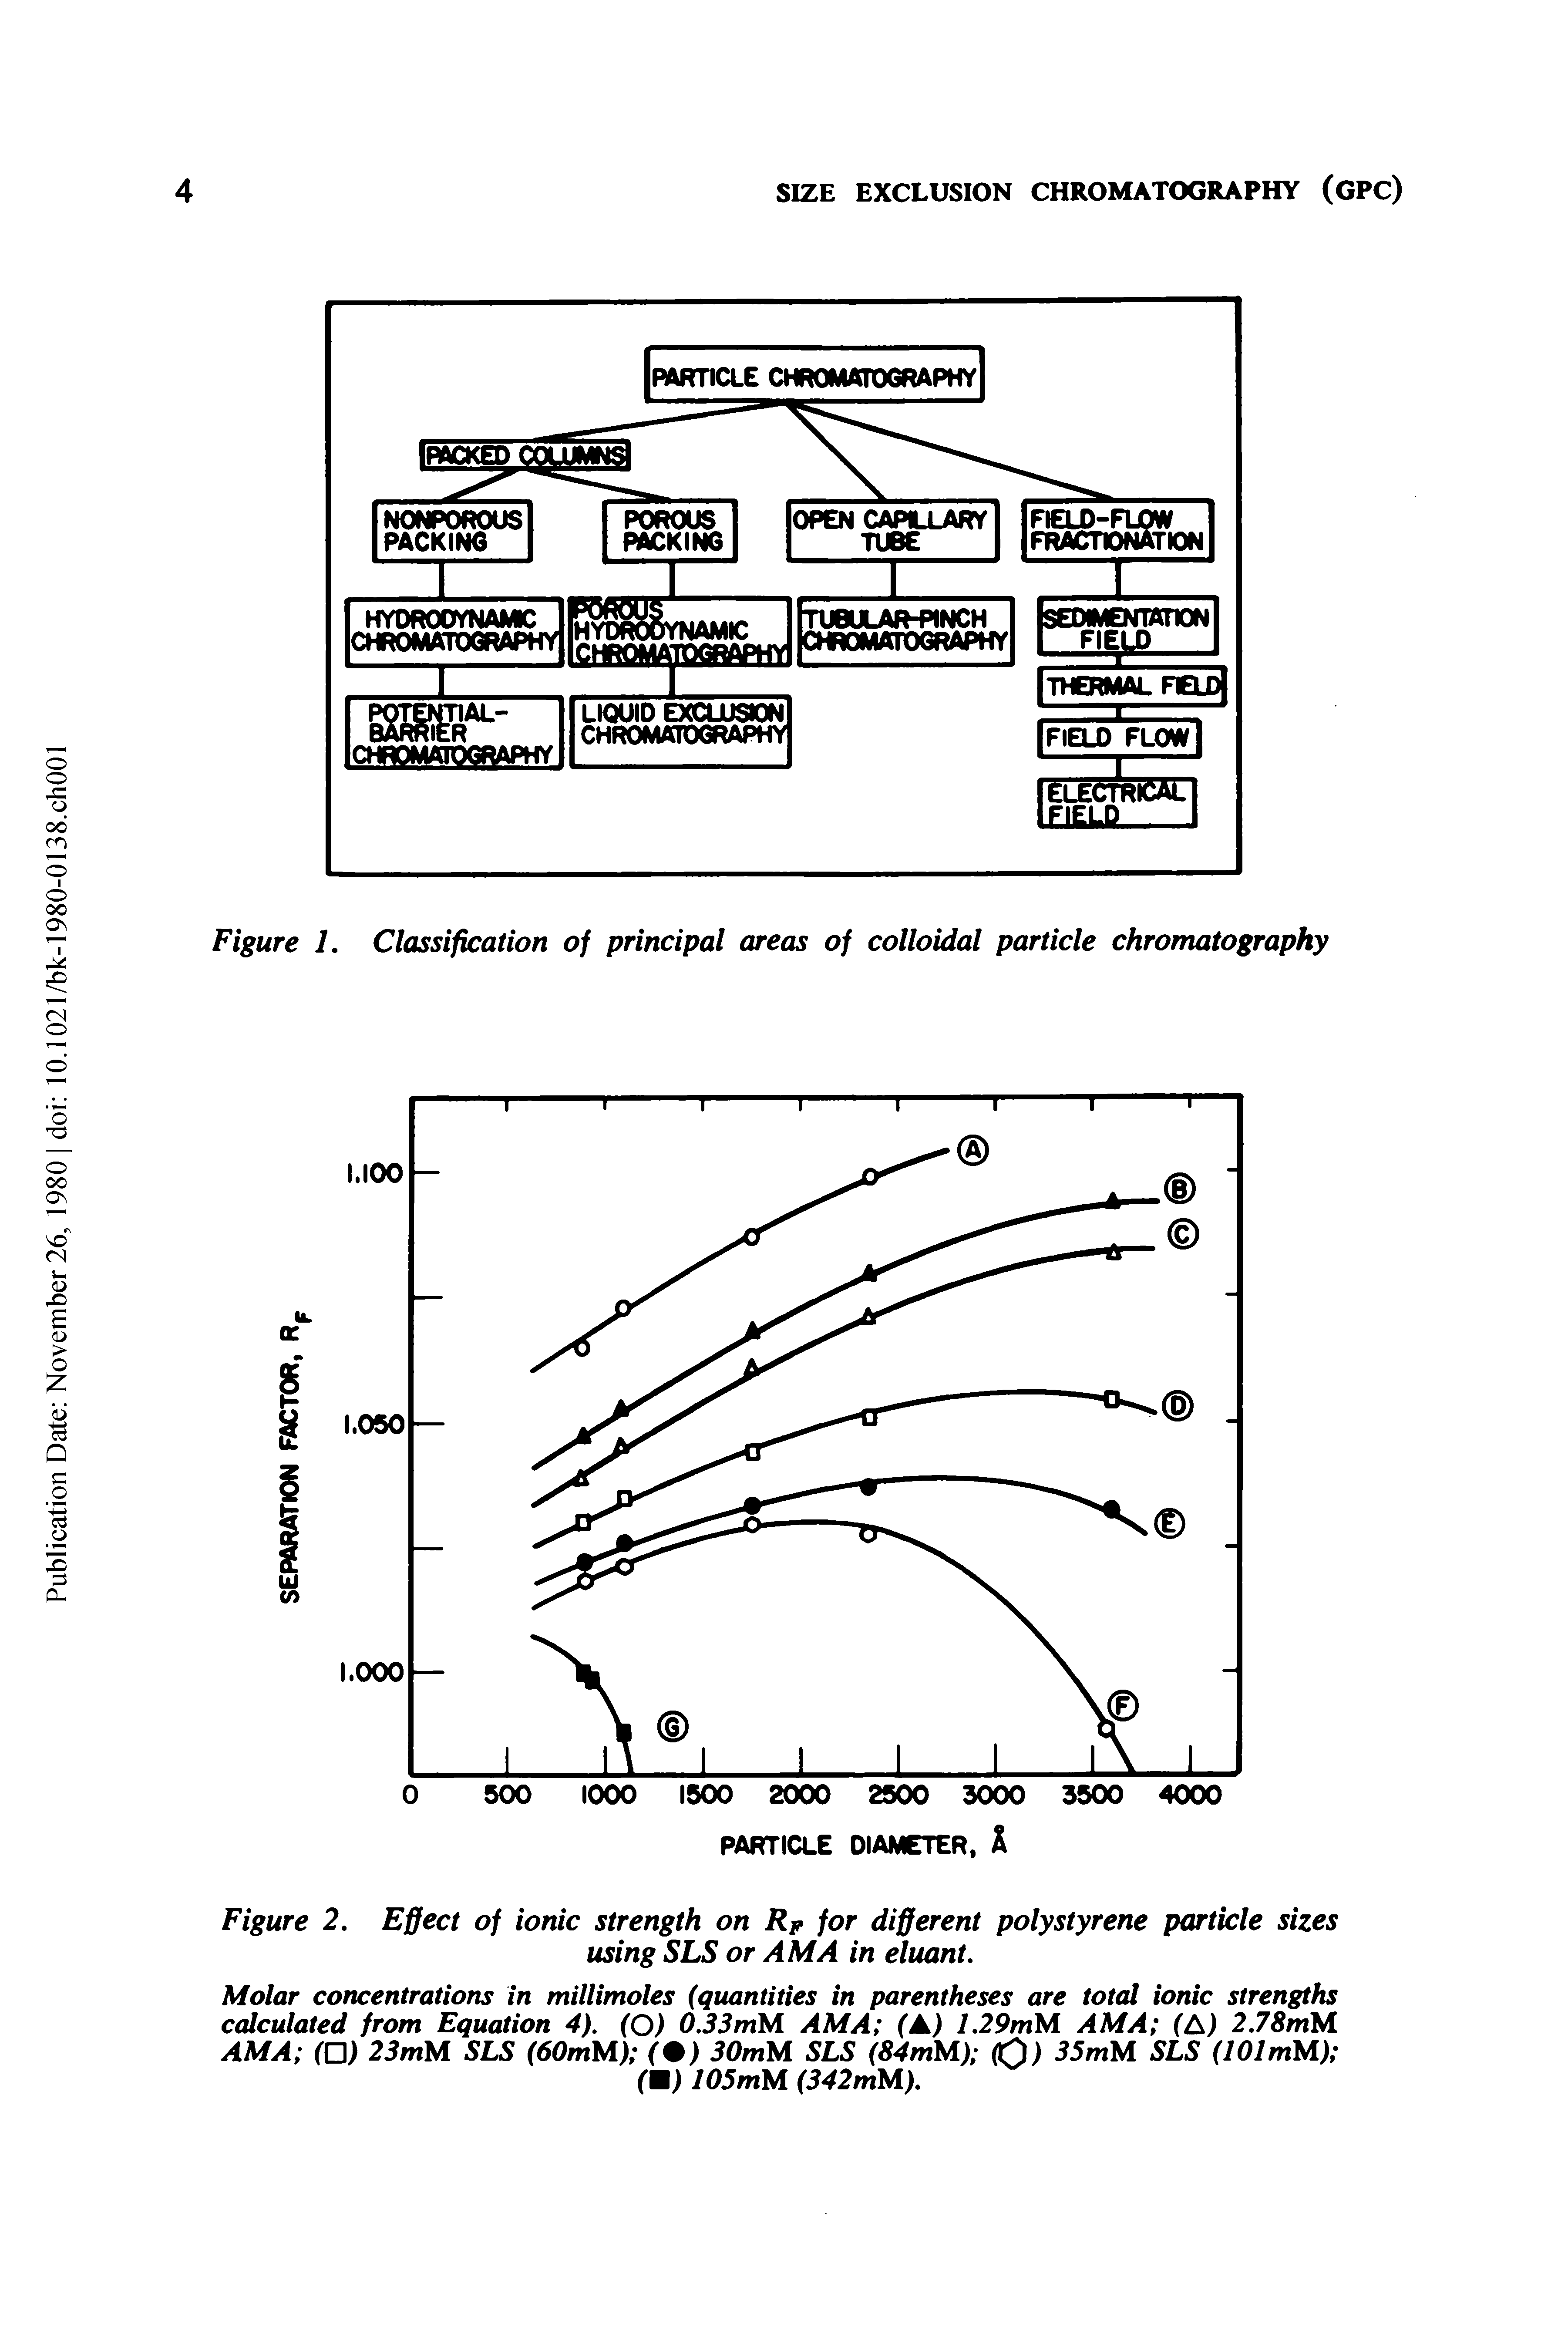 Figure 1, Classification of principal areas of colloidal particle chromatography...